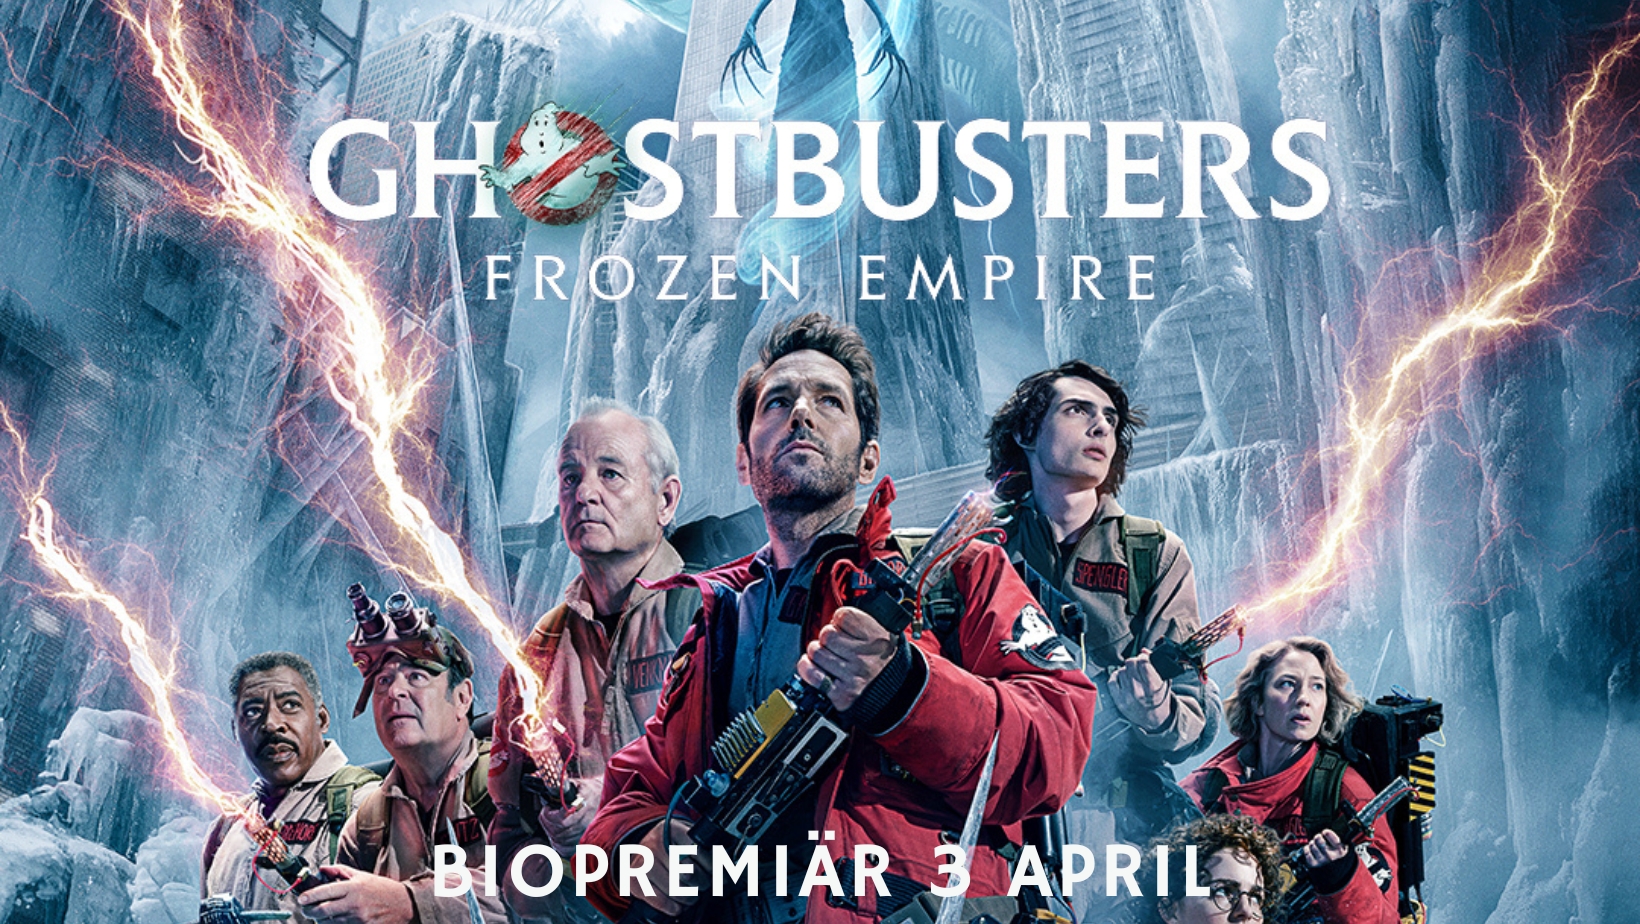 GHOSTBUSTERS: FROXEN EMPIRE